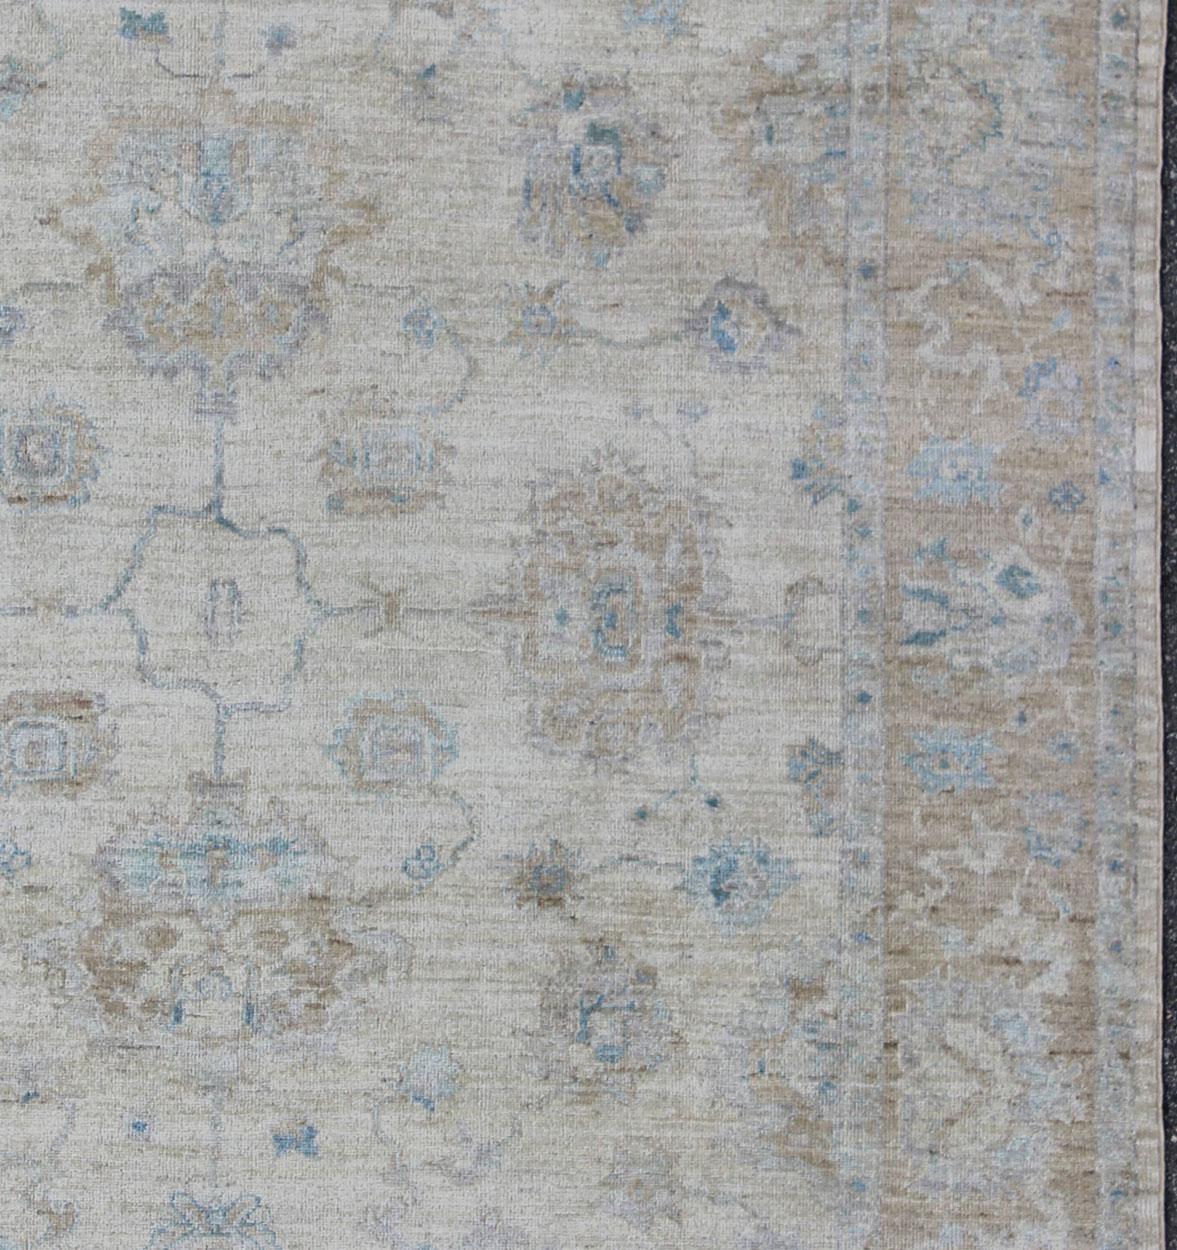 Blue, Gray, cream, taupe, and light blue Angora rug from Turkey, rug AN-123666, country of origin / type: Turkey / Angora Oushak

Measures: 9'4 x 11'8 

From our Angora collection, this piece is made with a combination of angora and old wool.